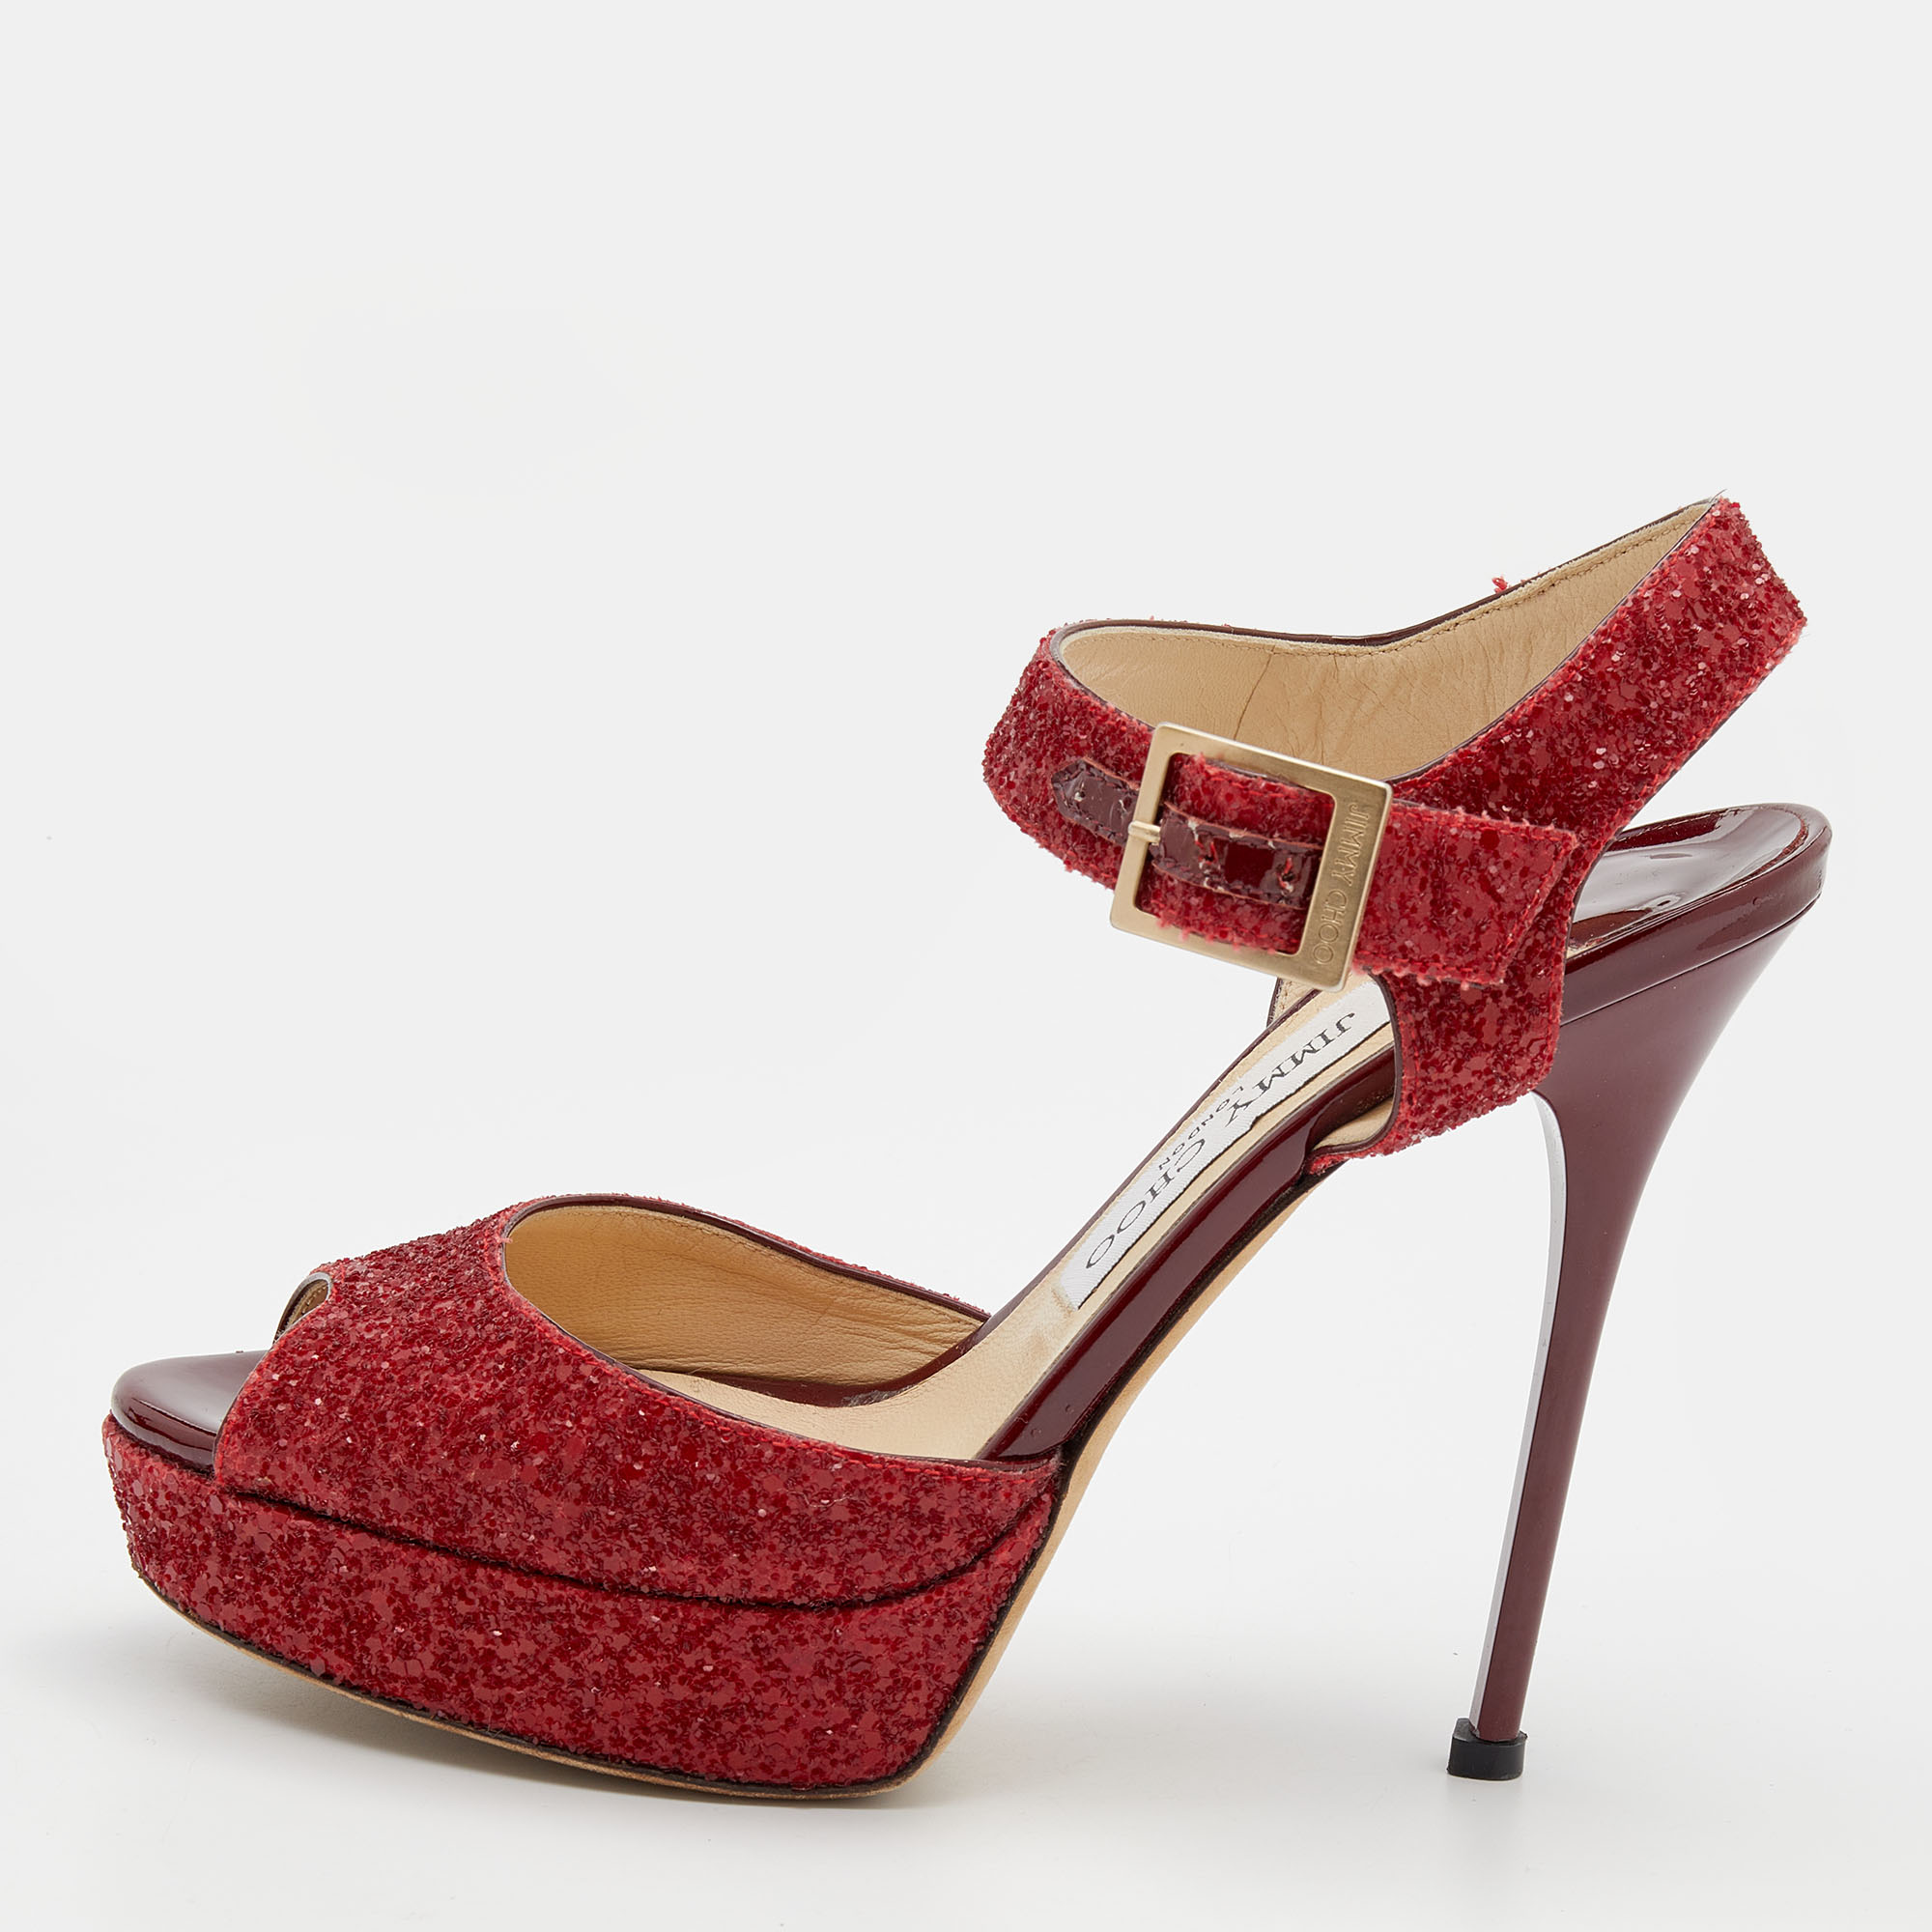 Feel luxuriously fashionable in these Jimmy Choo platform sandals. They have been crafted from ravishing red glitter and are finished with gold tone buckles slender 12.5 cm heels and leather lined insoles. Add them to your closet today